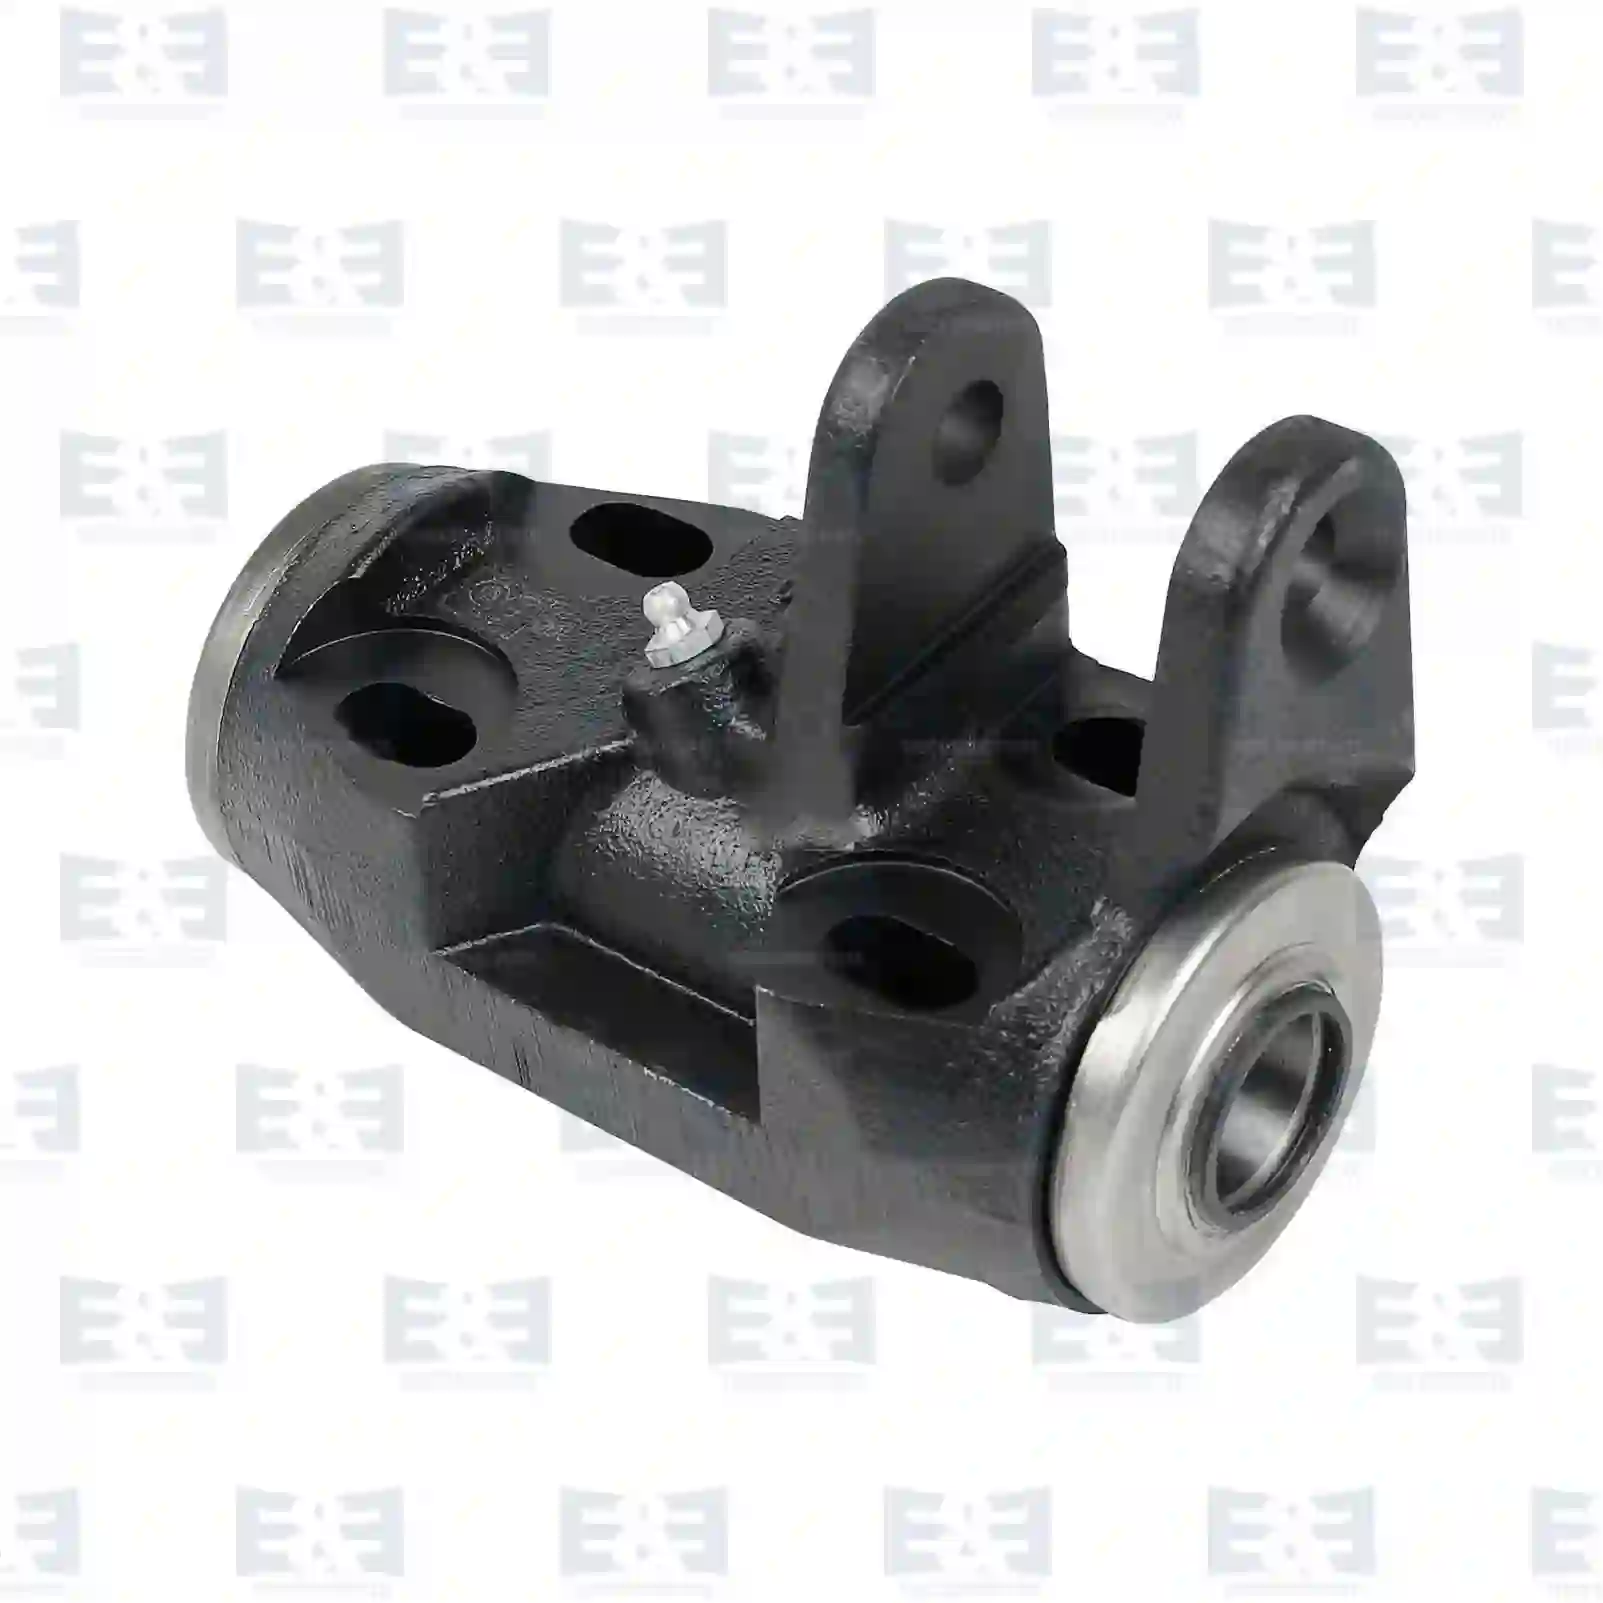 Bracket, left, with conical bearing, 2E2275349, 1075221 ||  2E2275349 E&E Truck Spare Parts | Truck Spare Parts, Auotomotive Spare Parts Bracket, left, with conical bearing, 2E2275349, 1075221 ||  2E2275349 E&E Truck Spare Parts | Truck Spare Parts, Auotomotive Spare Parts